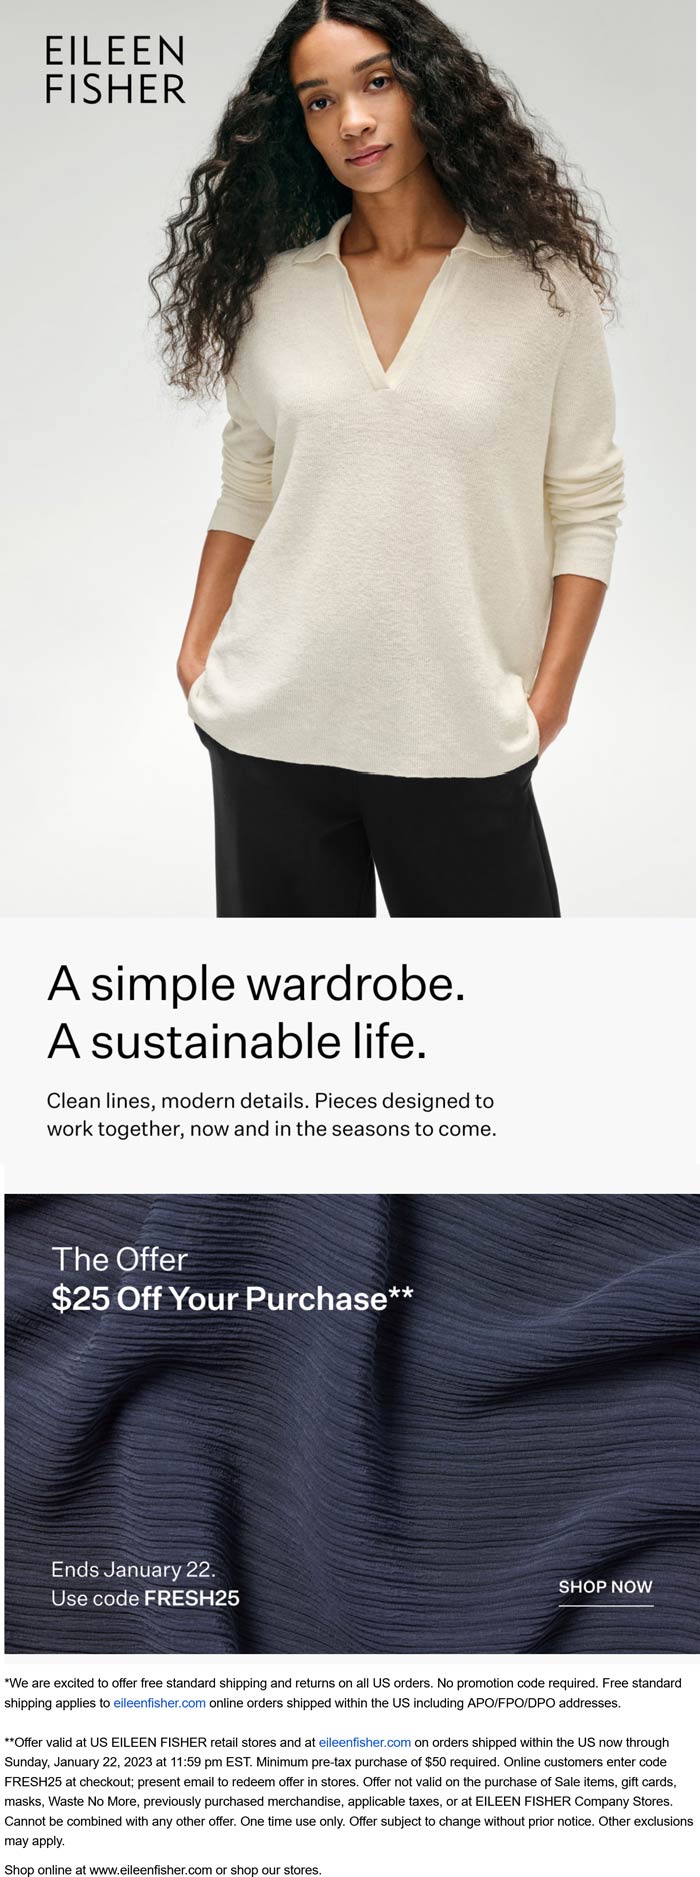 Eileen Fisher coupons & promo code for [February 2023]